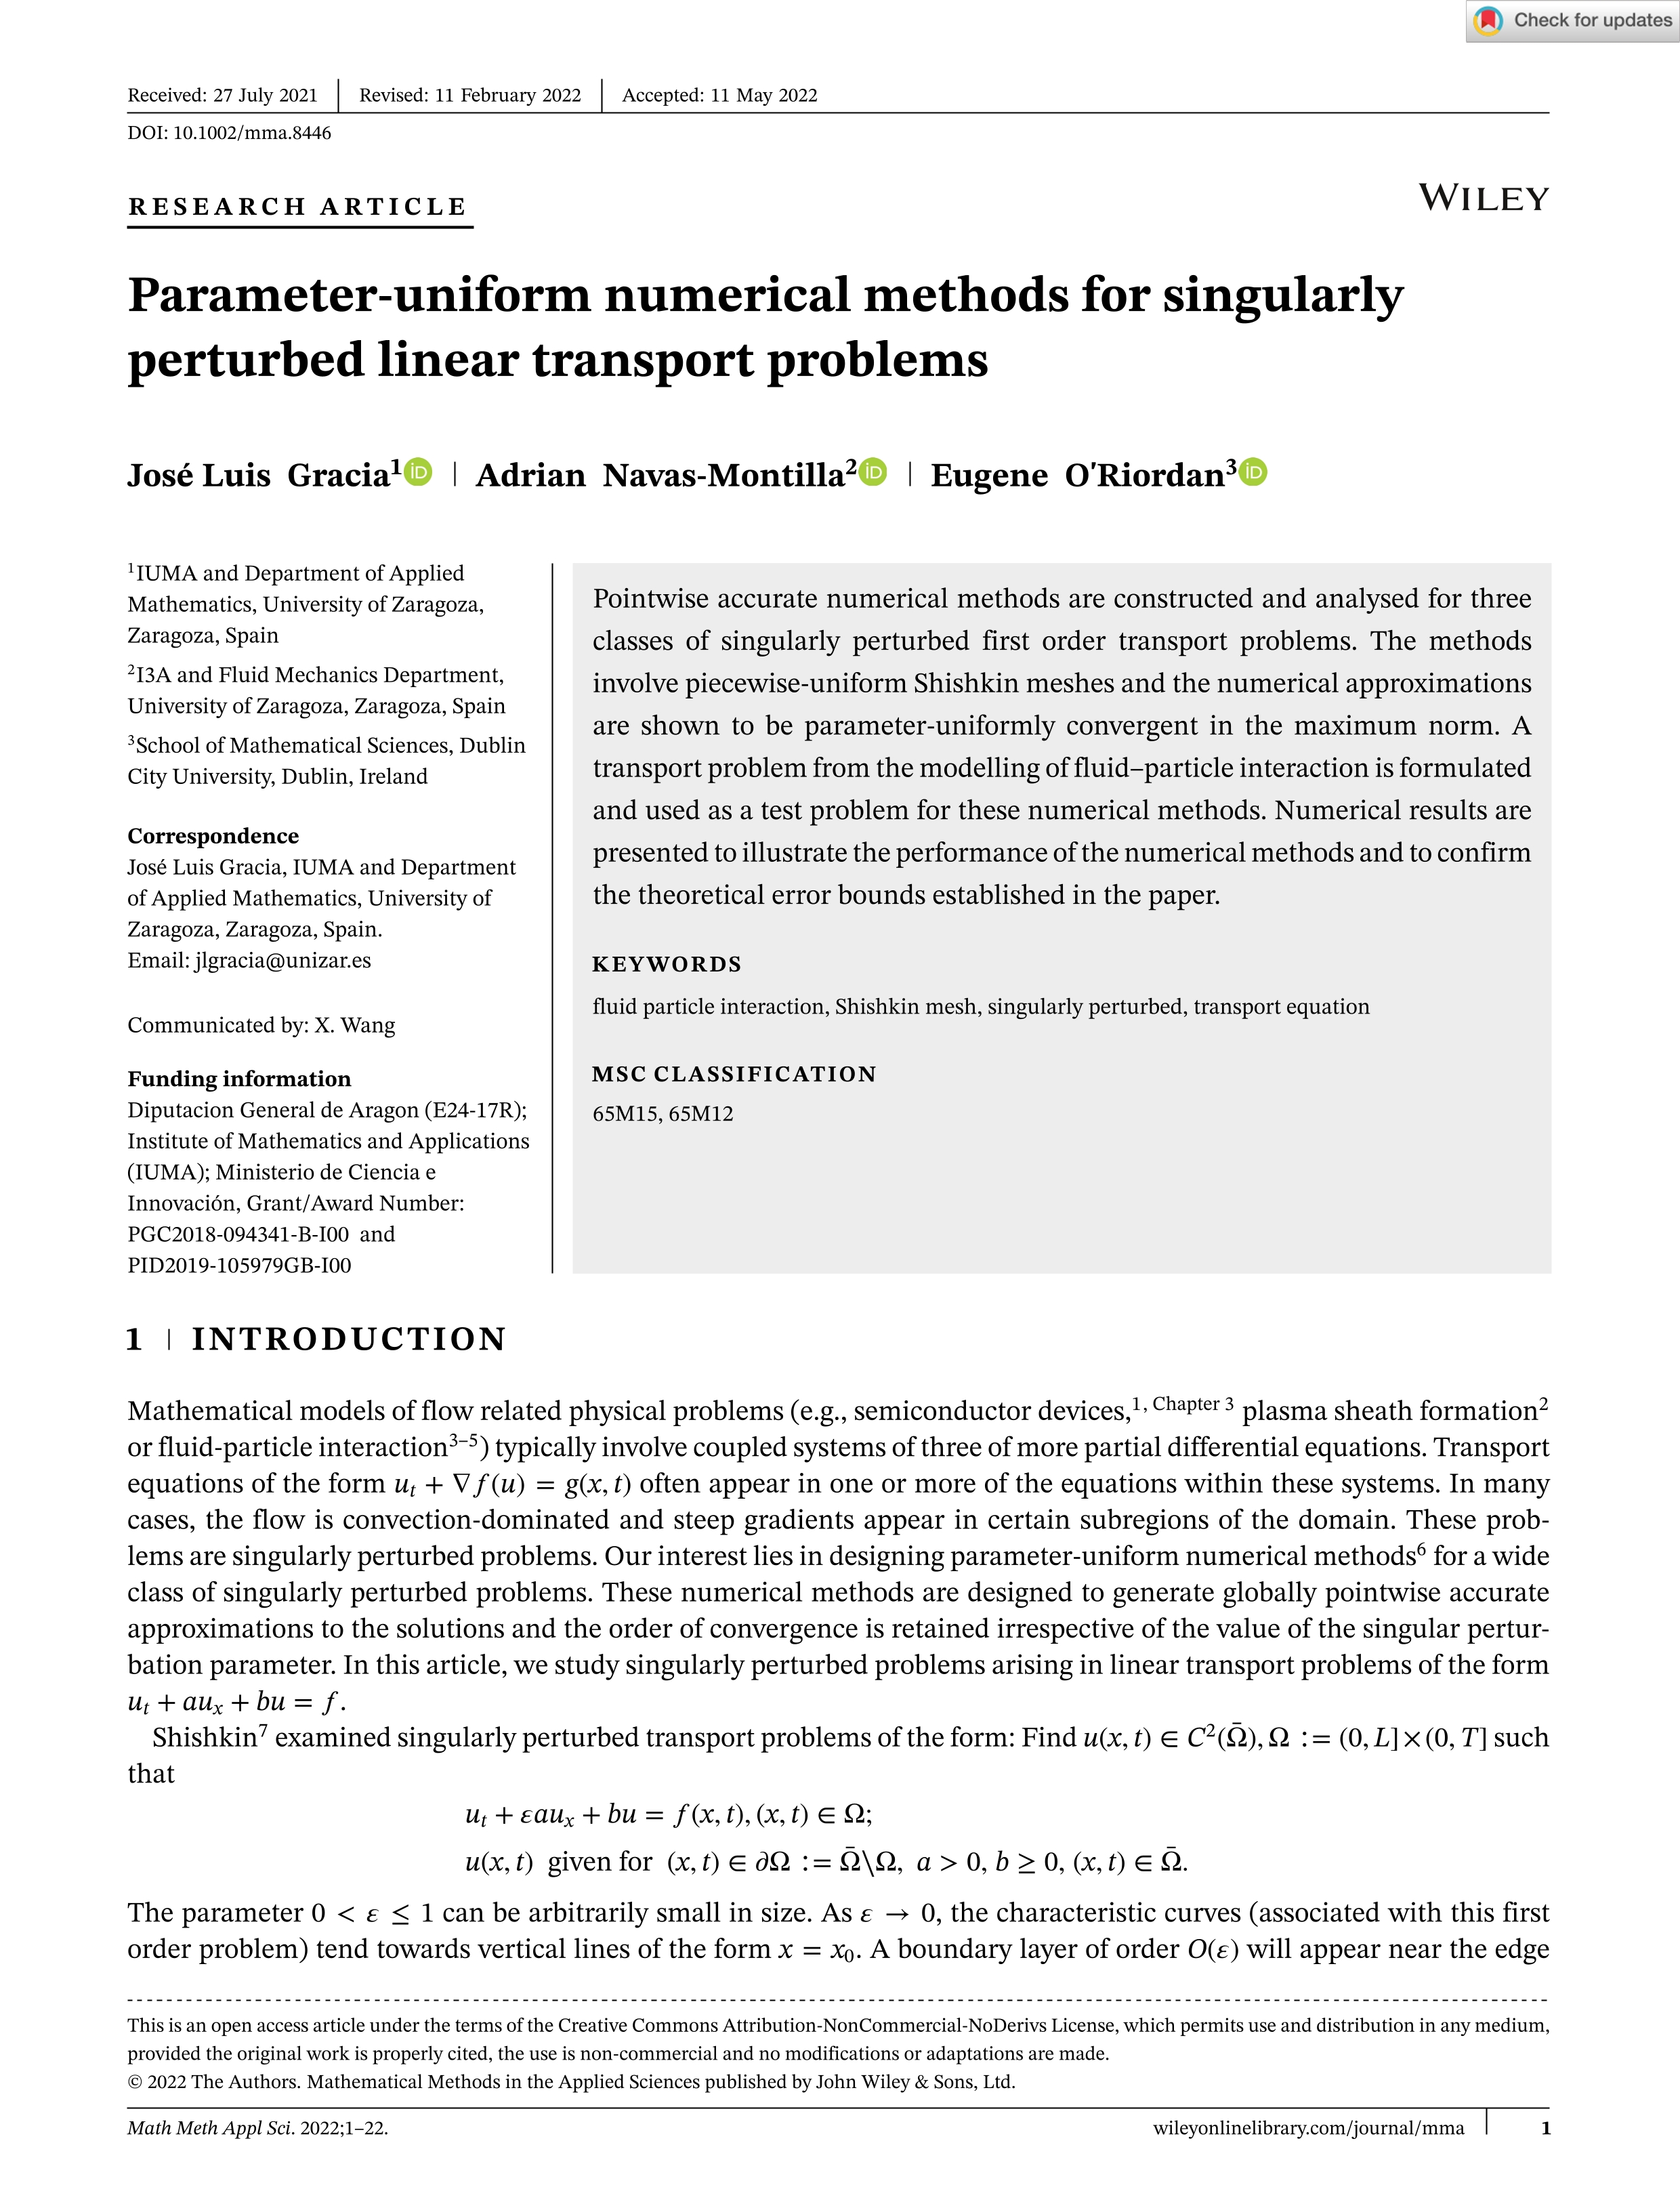 Parameter-uniform numerical methods for singularly perturbed linear transport problems